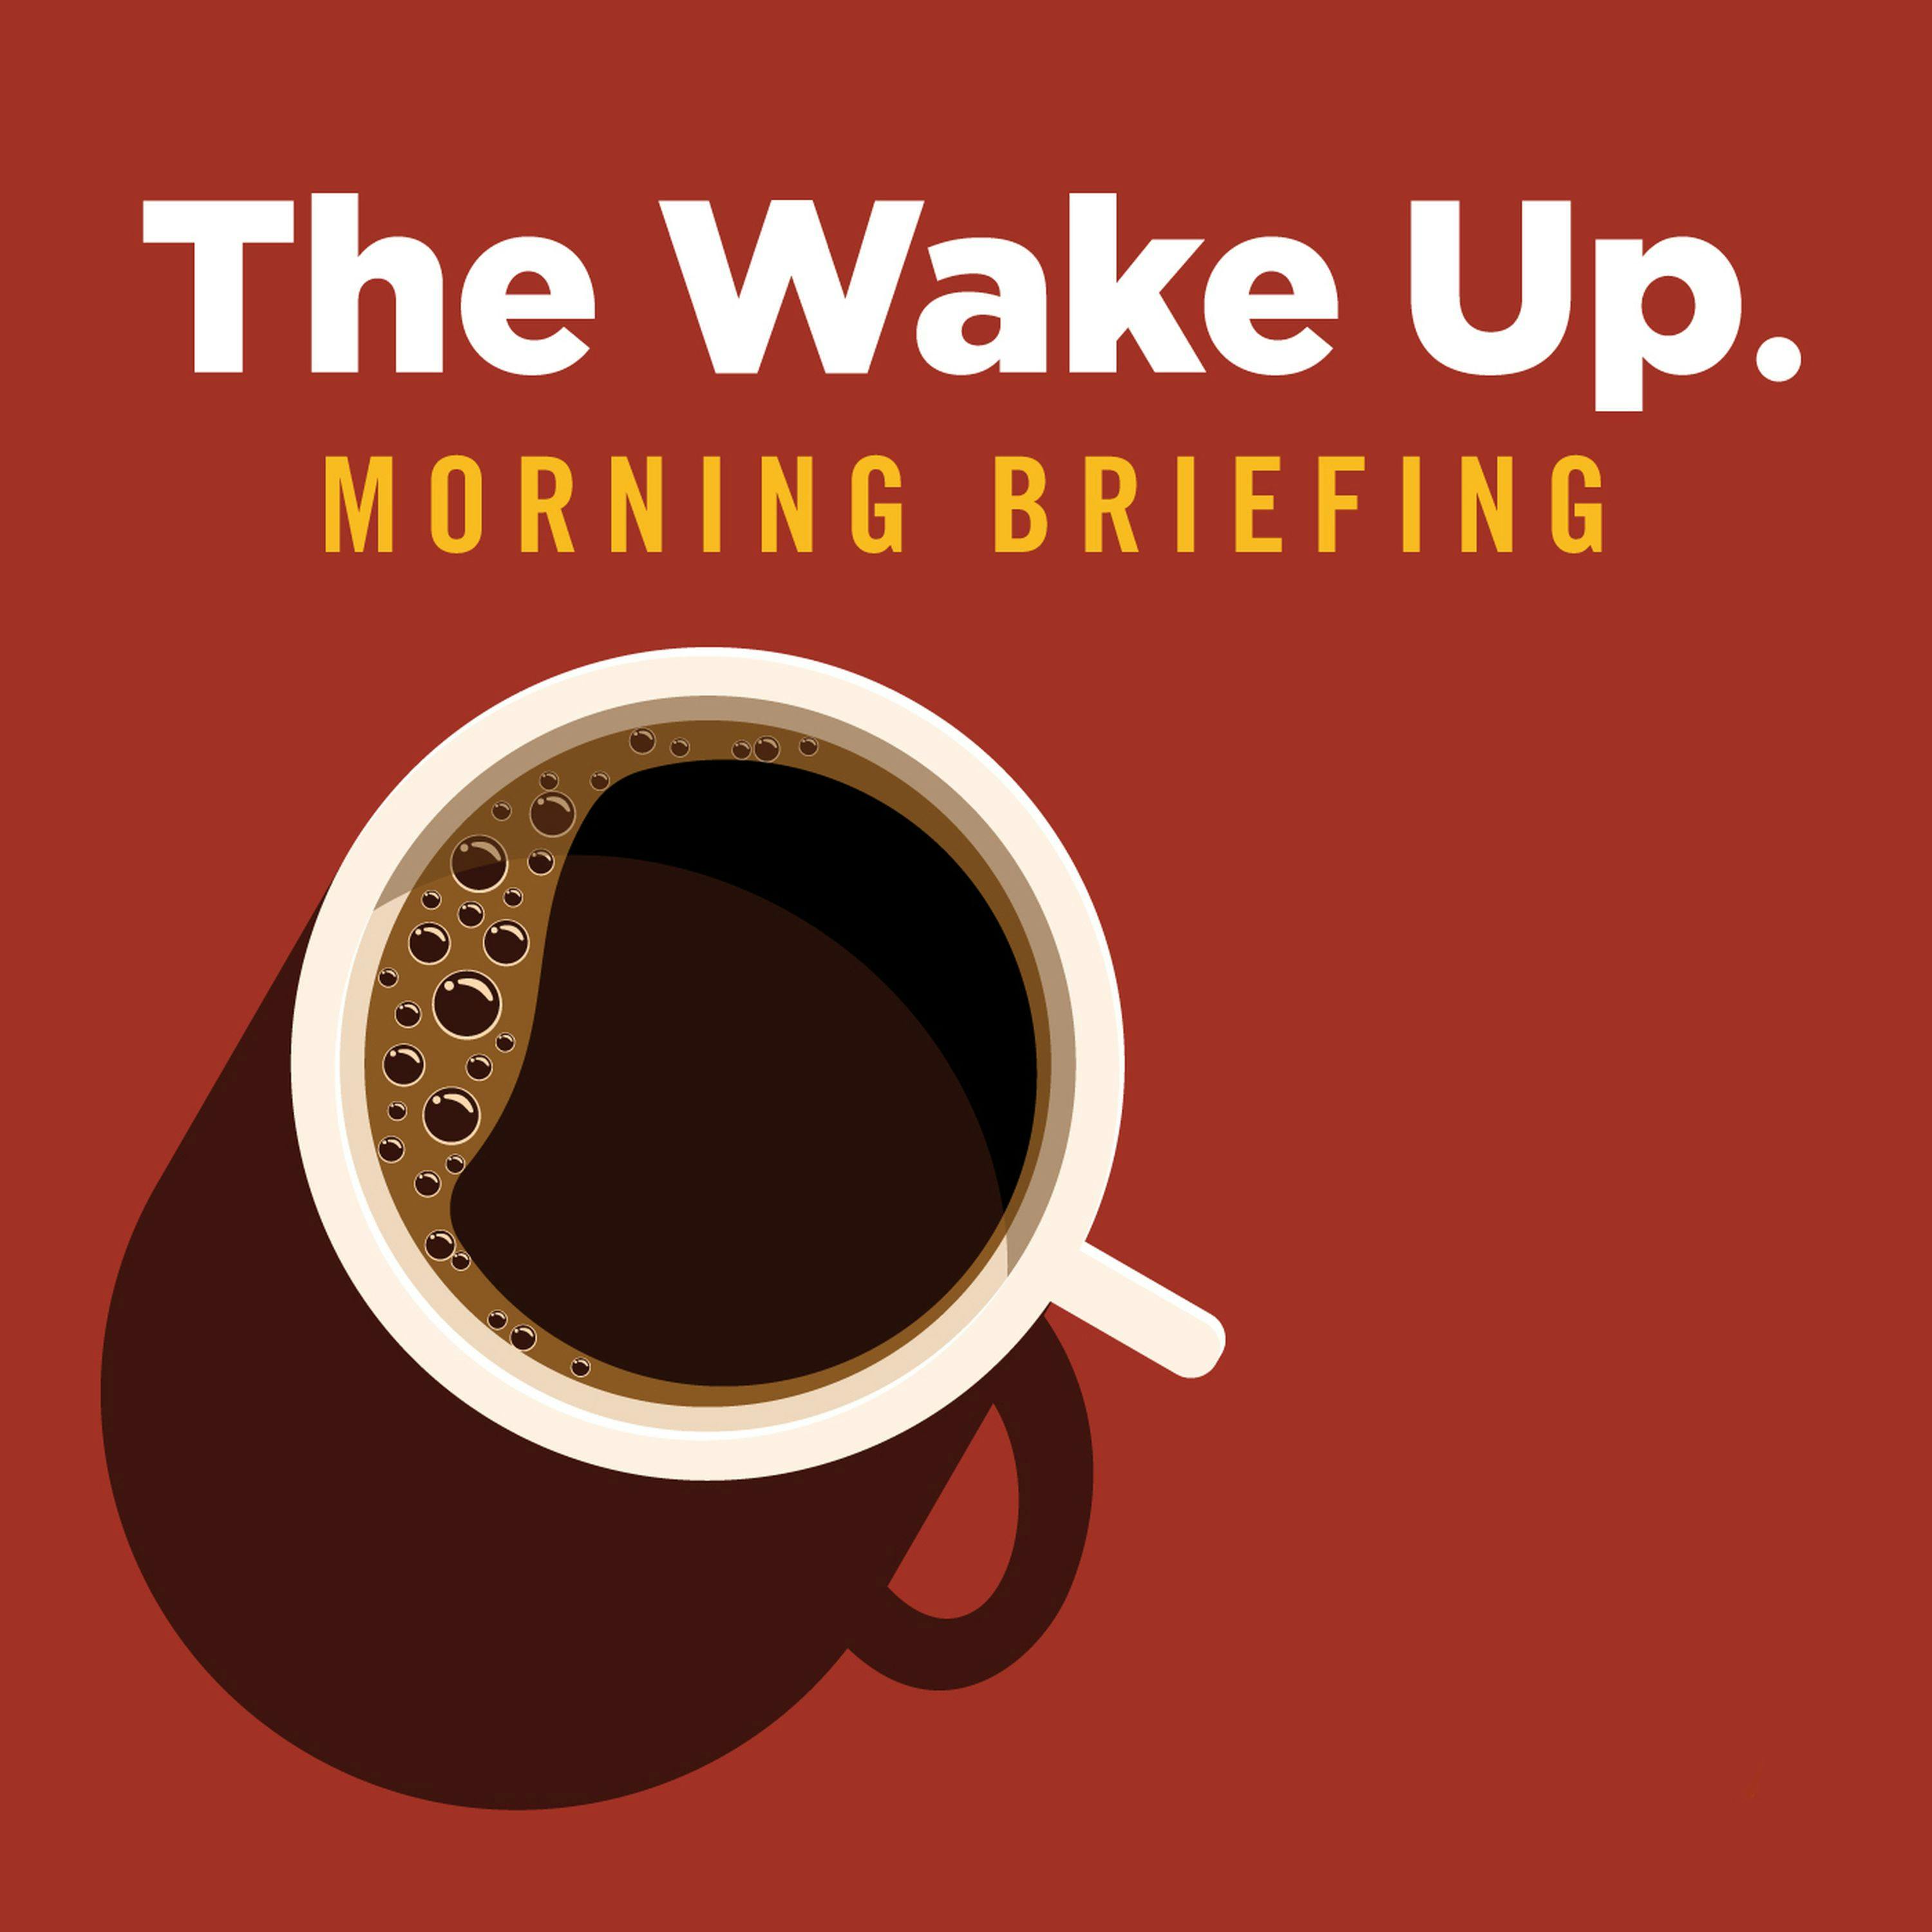 The Wake Up - July 20, 2020 - Is Mike DeWine about to issue a statewide mask order?